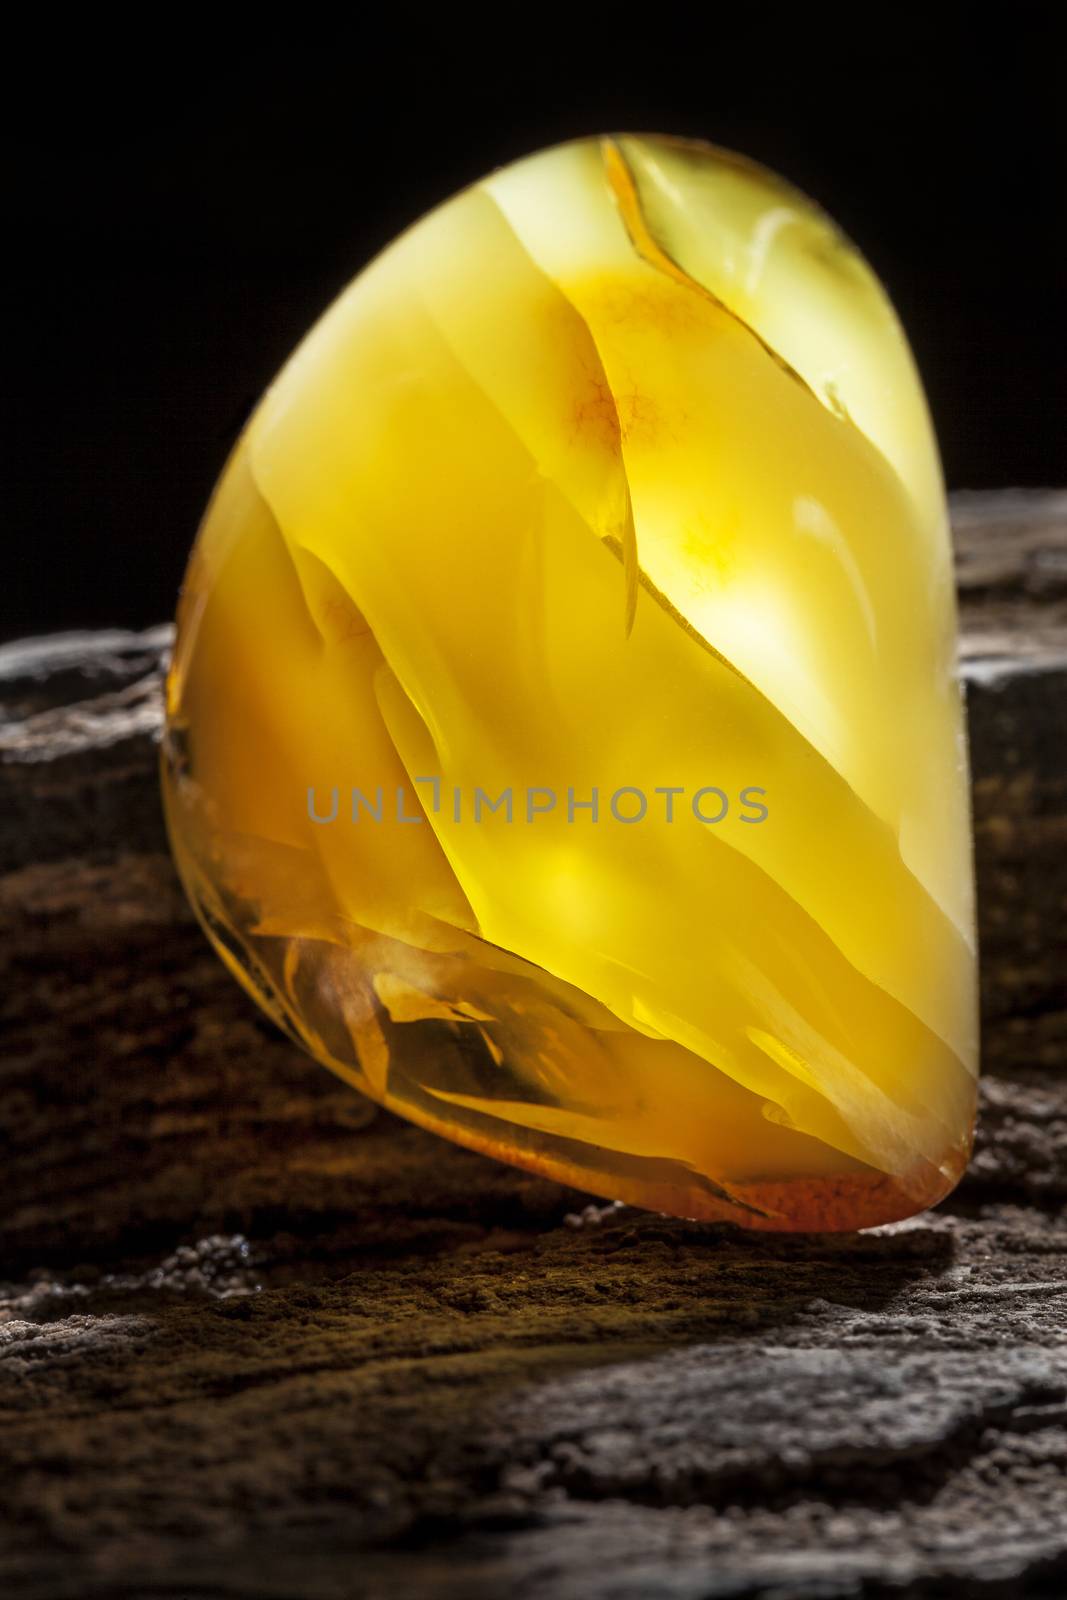 A piece of yellow semi opaque natural amber, classification color Bastard, has cracks inside. Polished, has a bead shape. Placed on dark stoned wood texture.